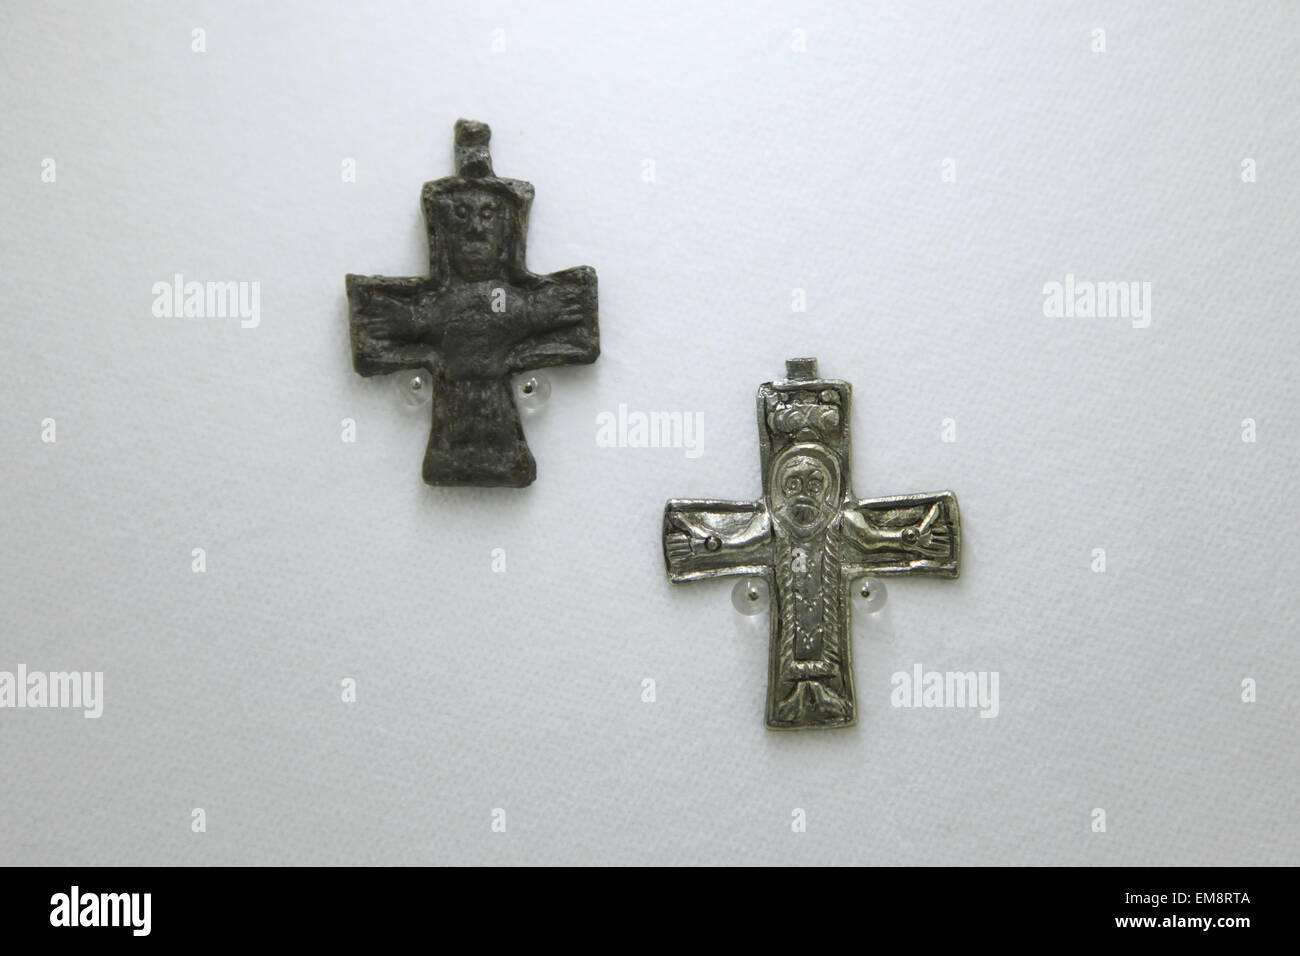 Great Moravian leaden and silver crosses with the image of the crucified Christ displayed at the exhibition 'Great Moravia and the Beginnings of Christianity' in Prague, Czech Republic. The crosses from the 9th century were discovered in Mikulcice, Czech Republic, the former capital city of the Great Moravian Empire. The exhibition presenting medieval treasures and original artefacts of the first Slavic state runs in Prague Castle till June 28, 2015. Stock Photo